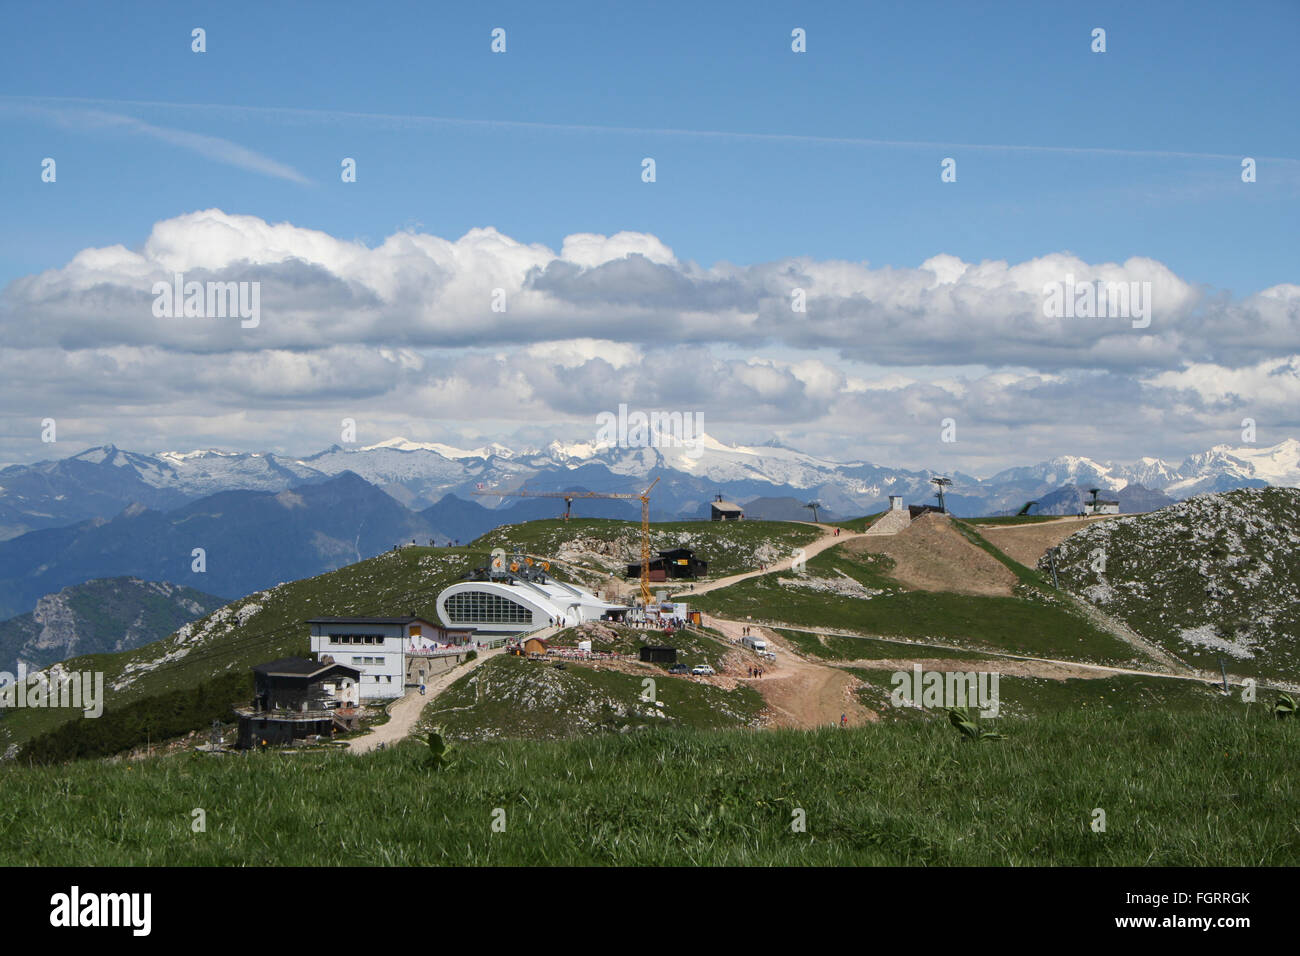 Construction of the modern Monte Baldo cable car station in the Italian Alps. Snow covered peaks line the background. Stock Photo